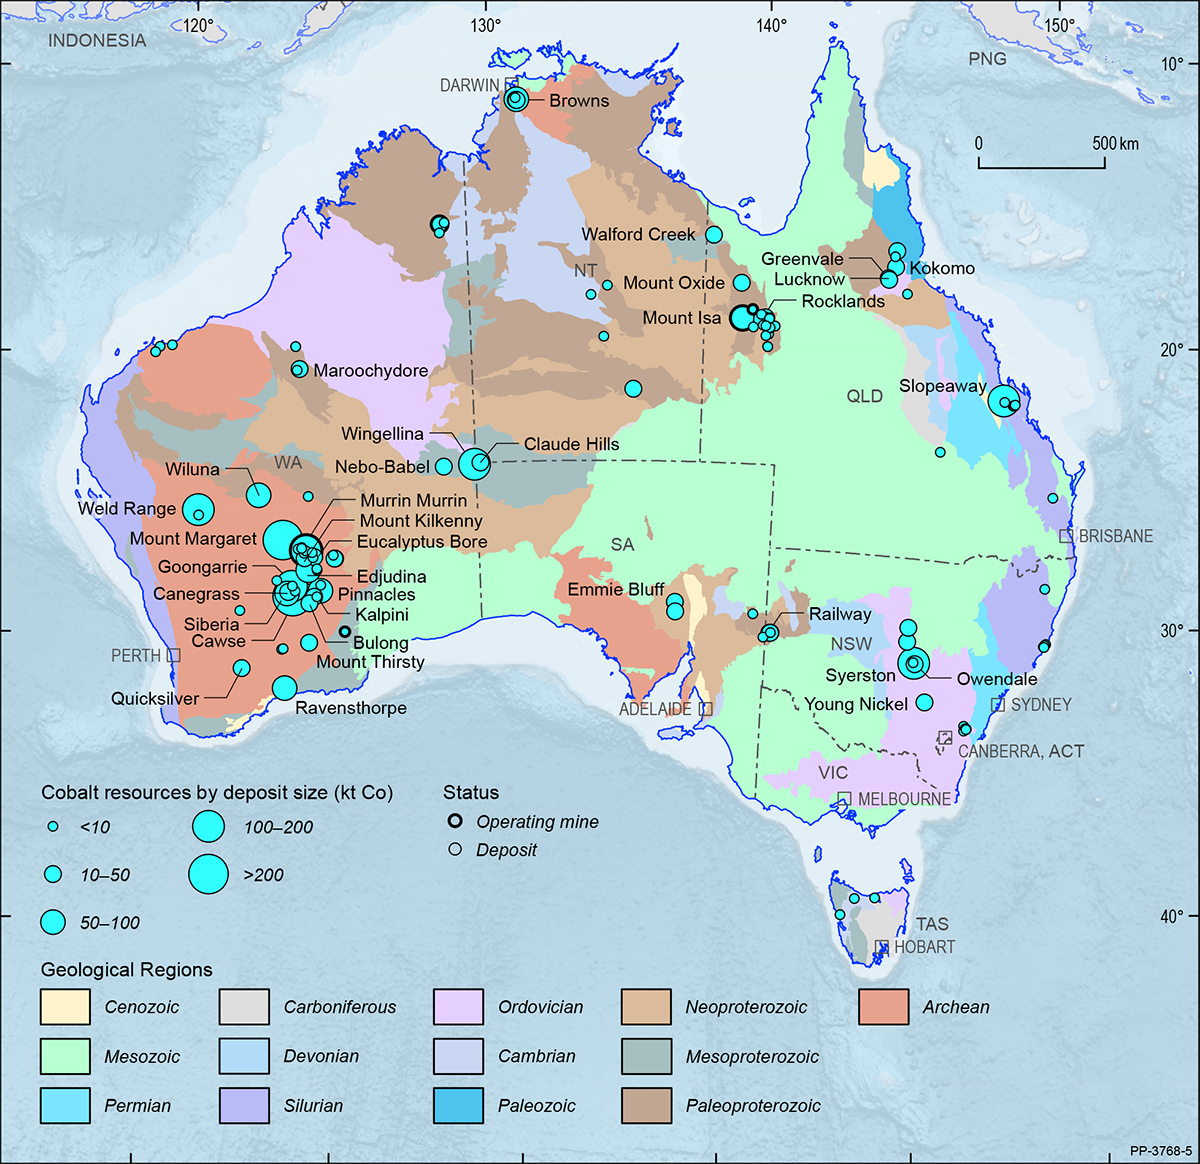 A map showing the Australian continent shaded by the ages of the main geological provinces highlighting the geographical distribution of Australian cobalt deposits and operating mines in 2019.